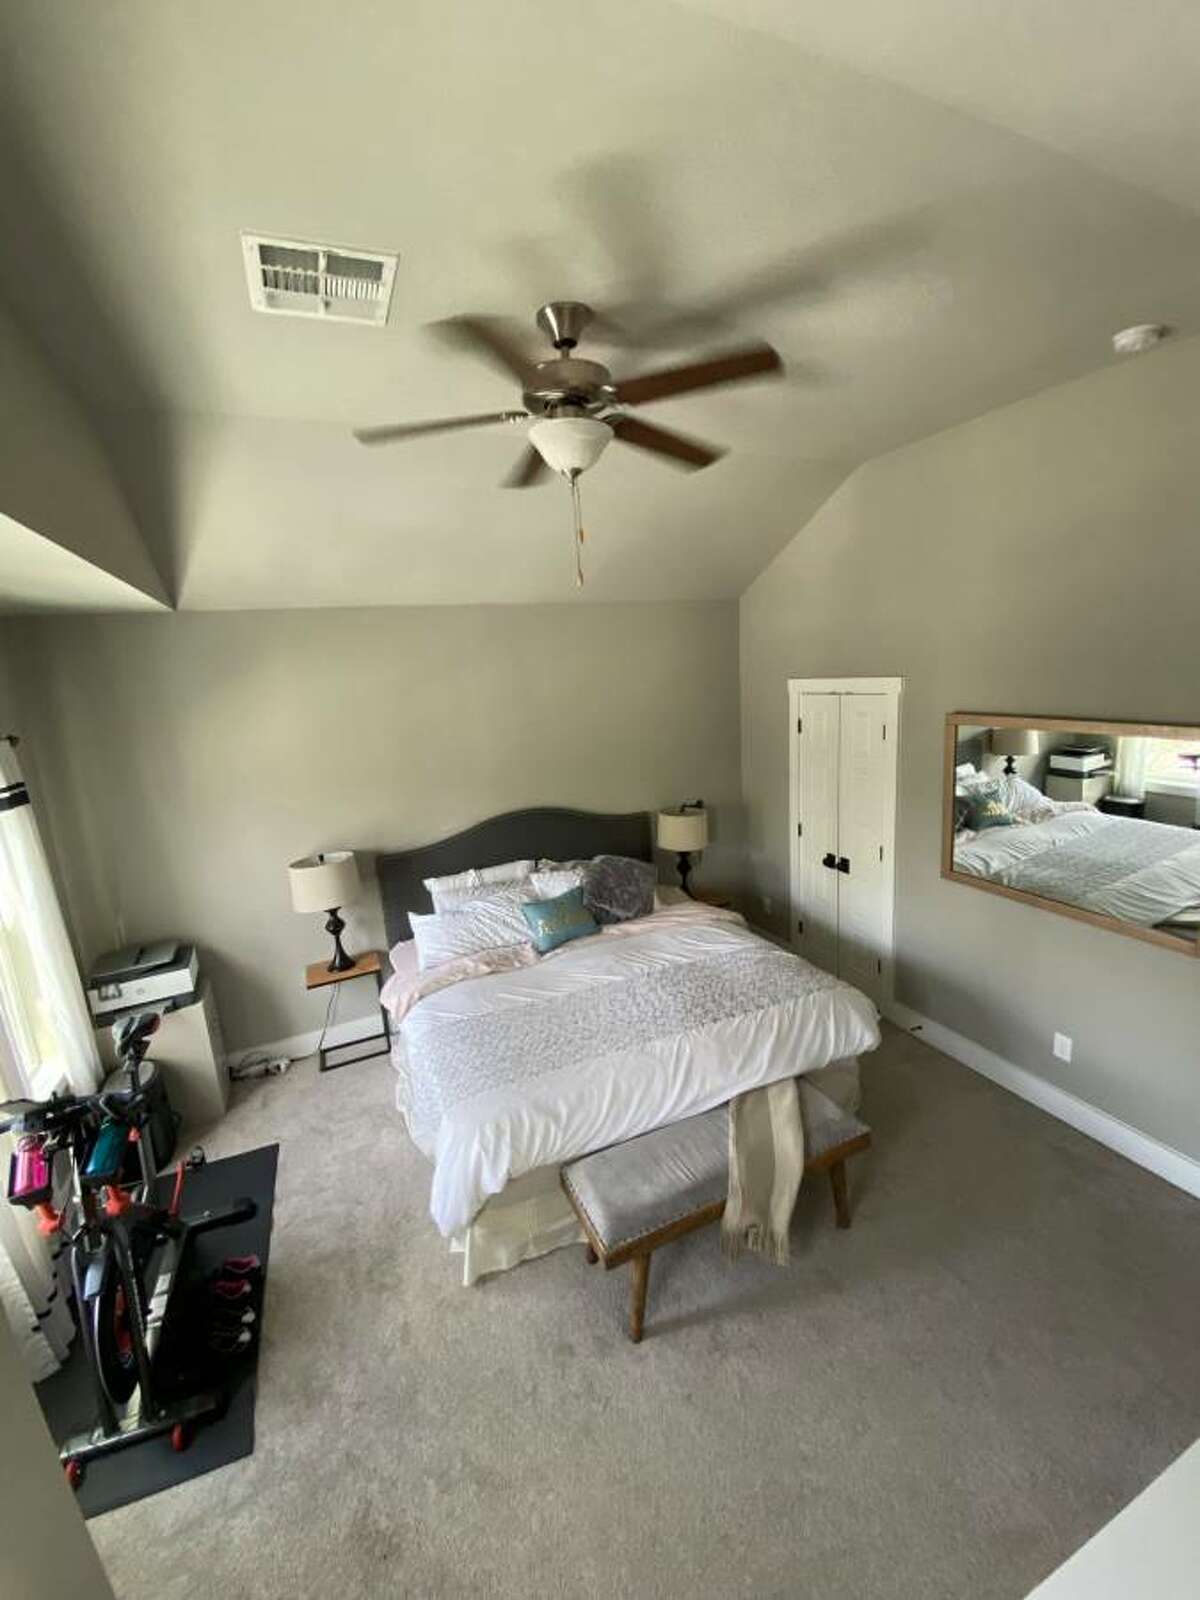 This bedroom on the second floor is only made bigger by the tall ceilings.